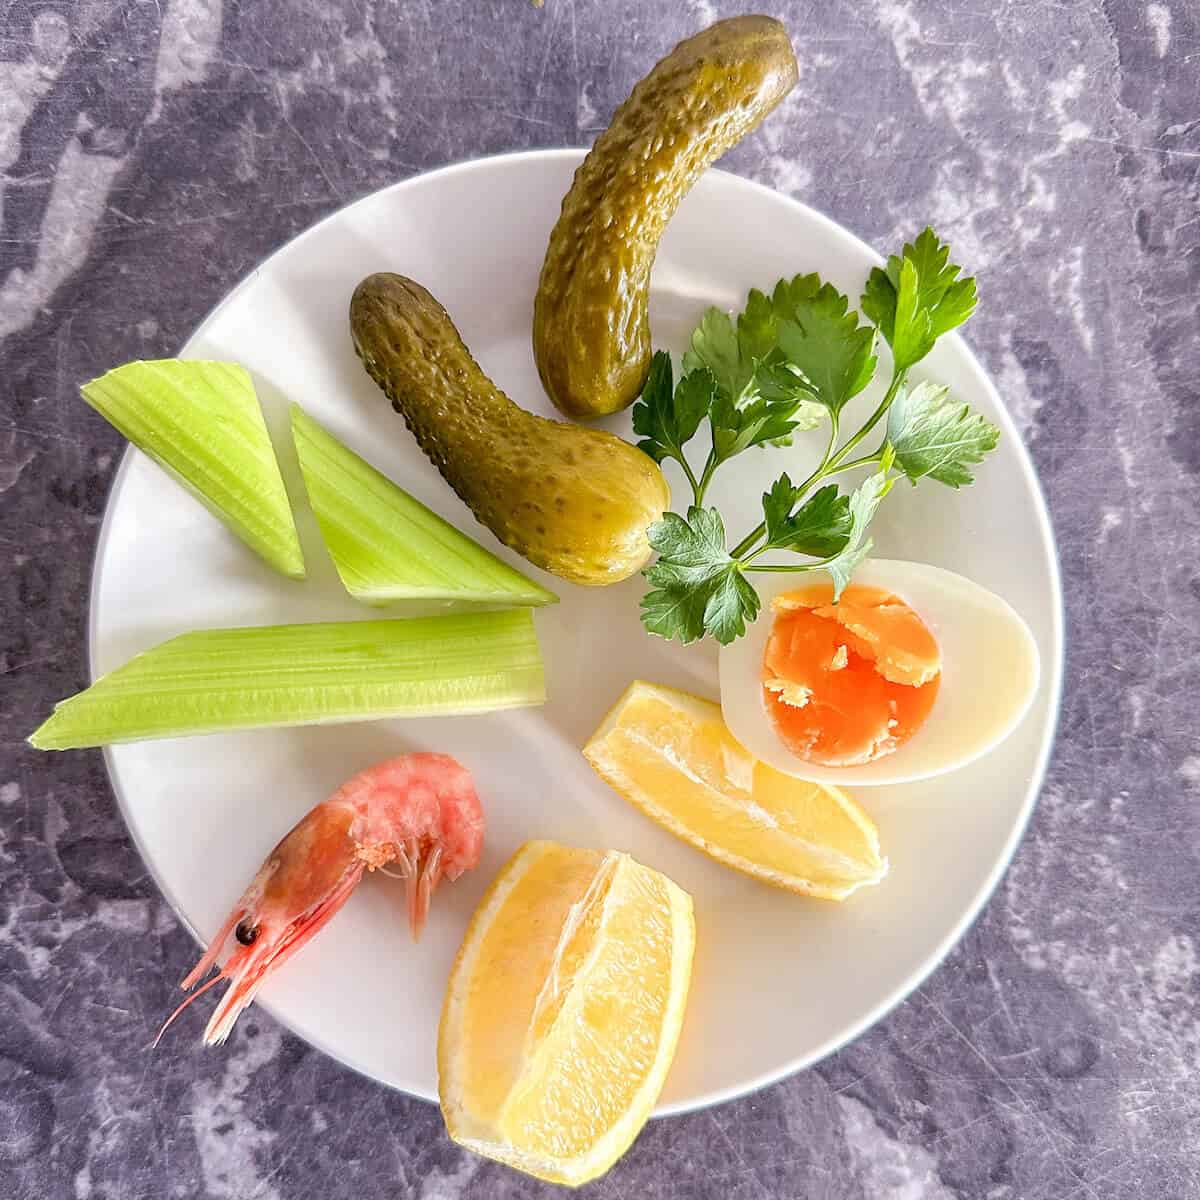 A plate with pickles, prawns, boiled eggs, lemon wedges and celery sticks. 